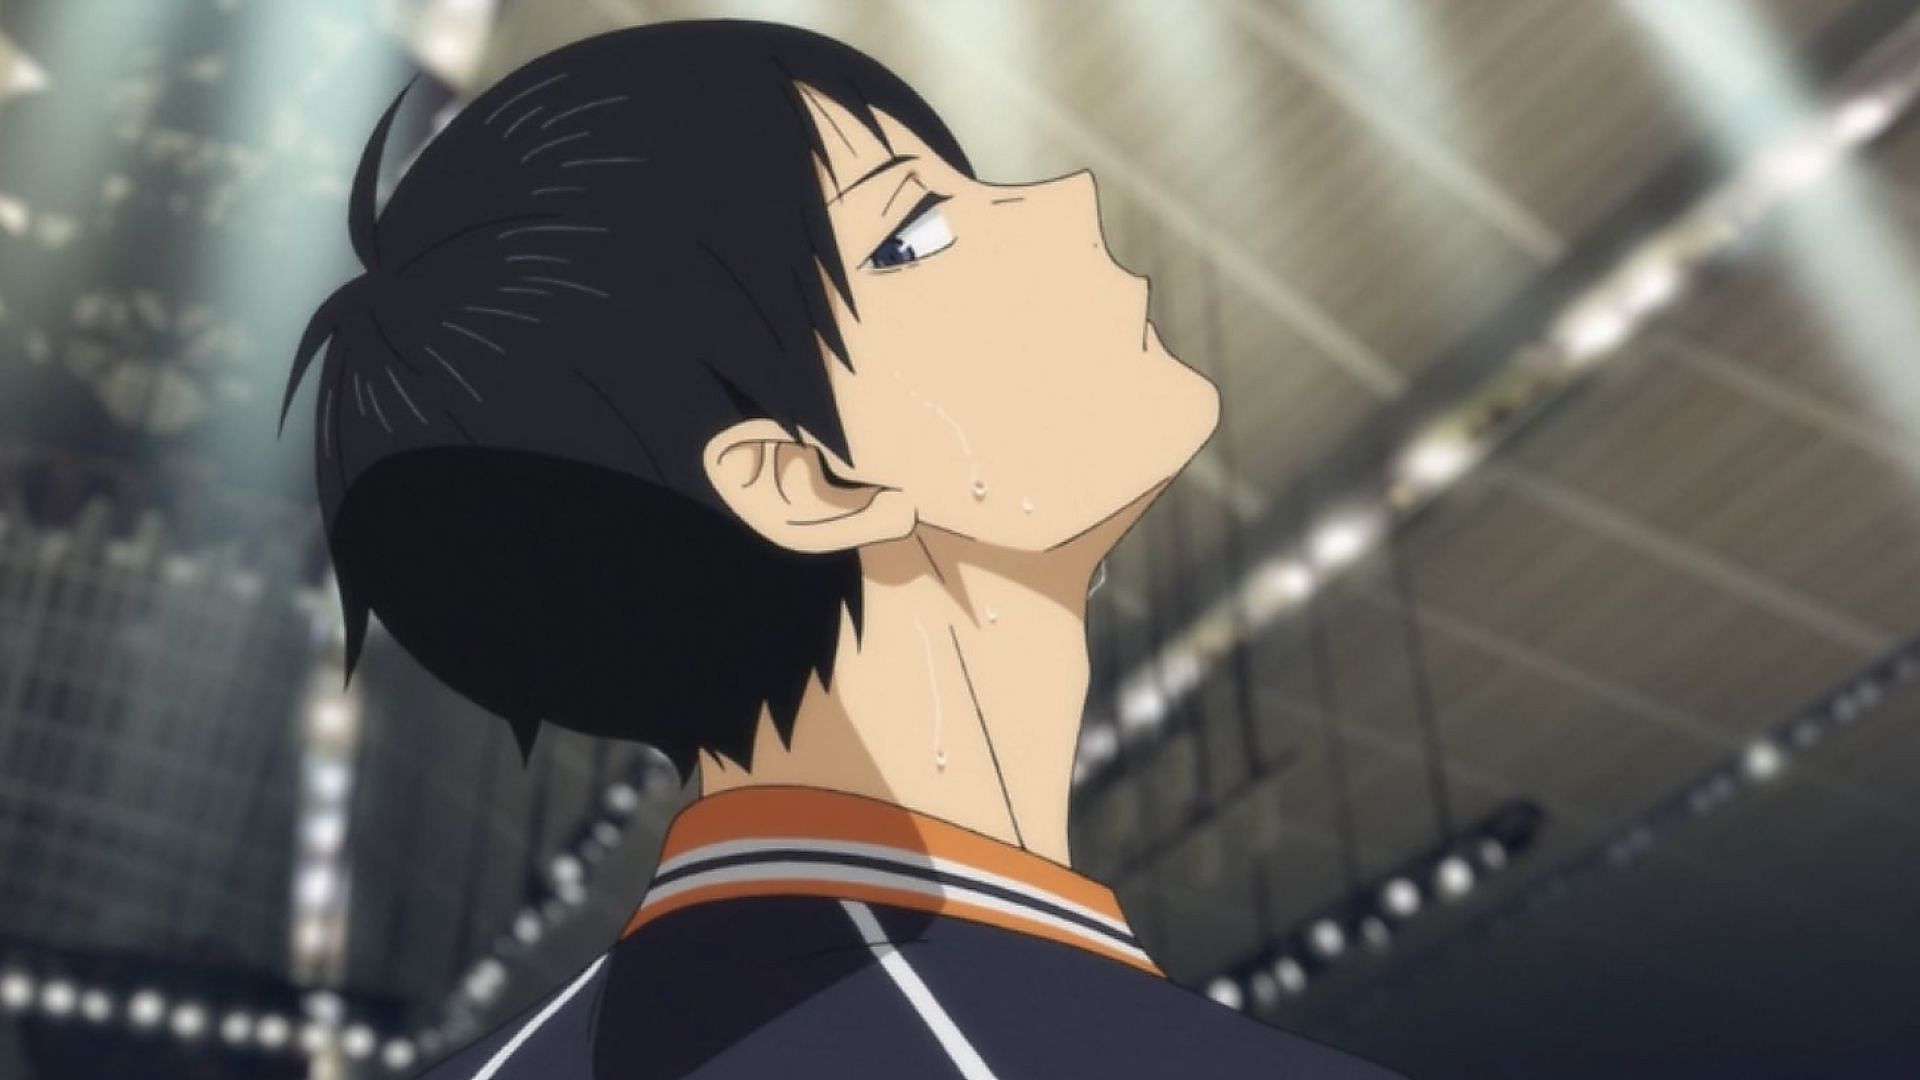 Tobio Kageyama, one of the most popular sports anime characters (Image via Production I.G)